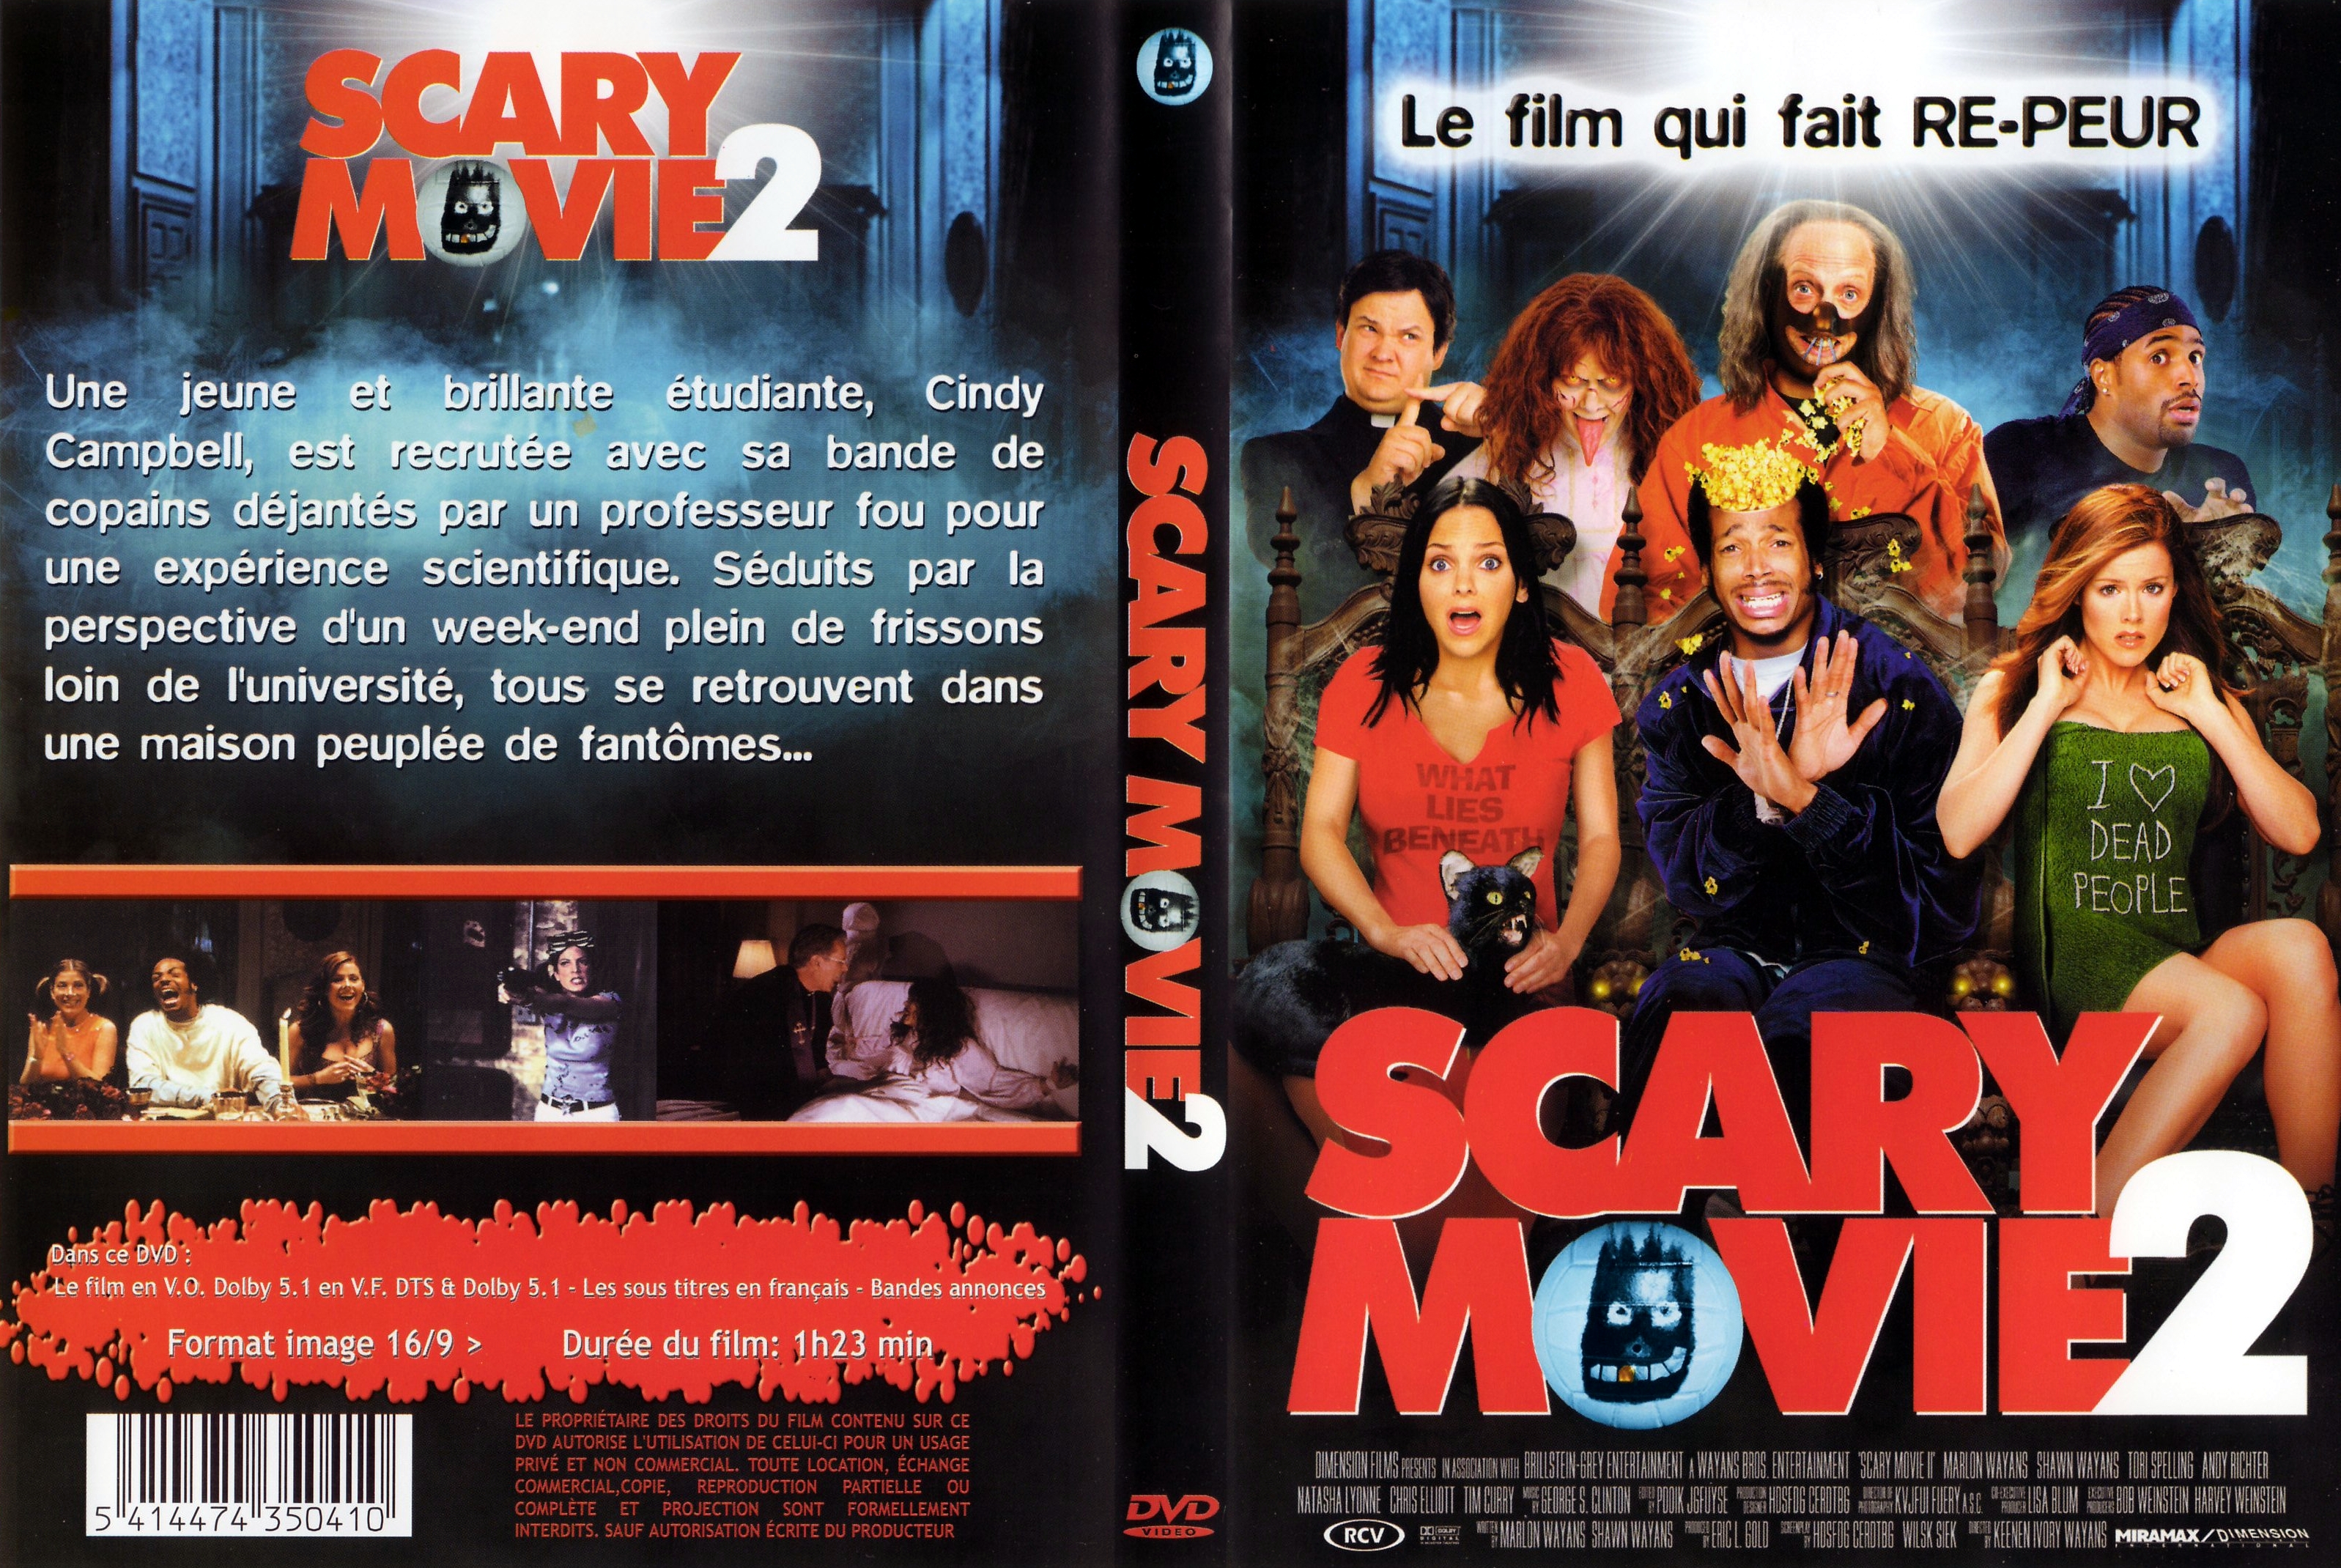 Jaquette DVD Scary movie 2 v2